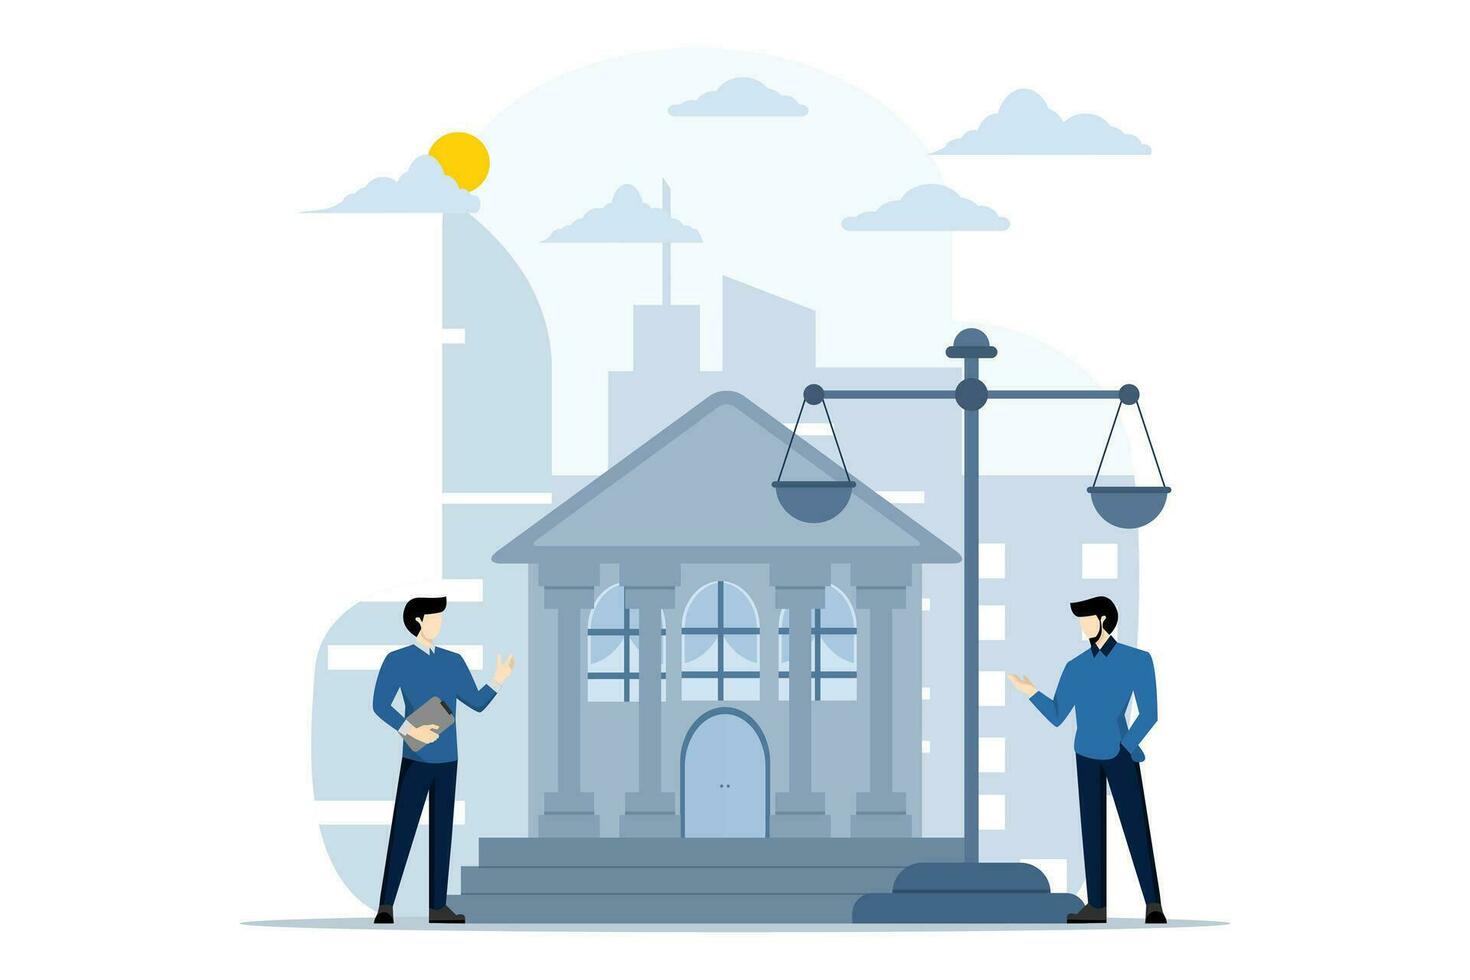 Legal advice concept. Law and justice scene, lawyer consultation, advising client, scales of justice, legal advice, lawyer consultation with client, flat vector illustration on white background.